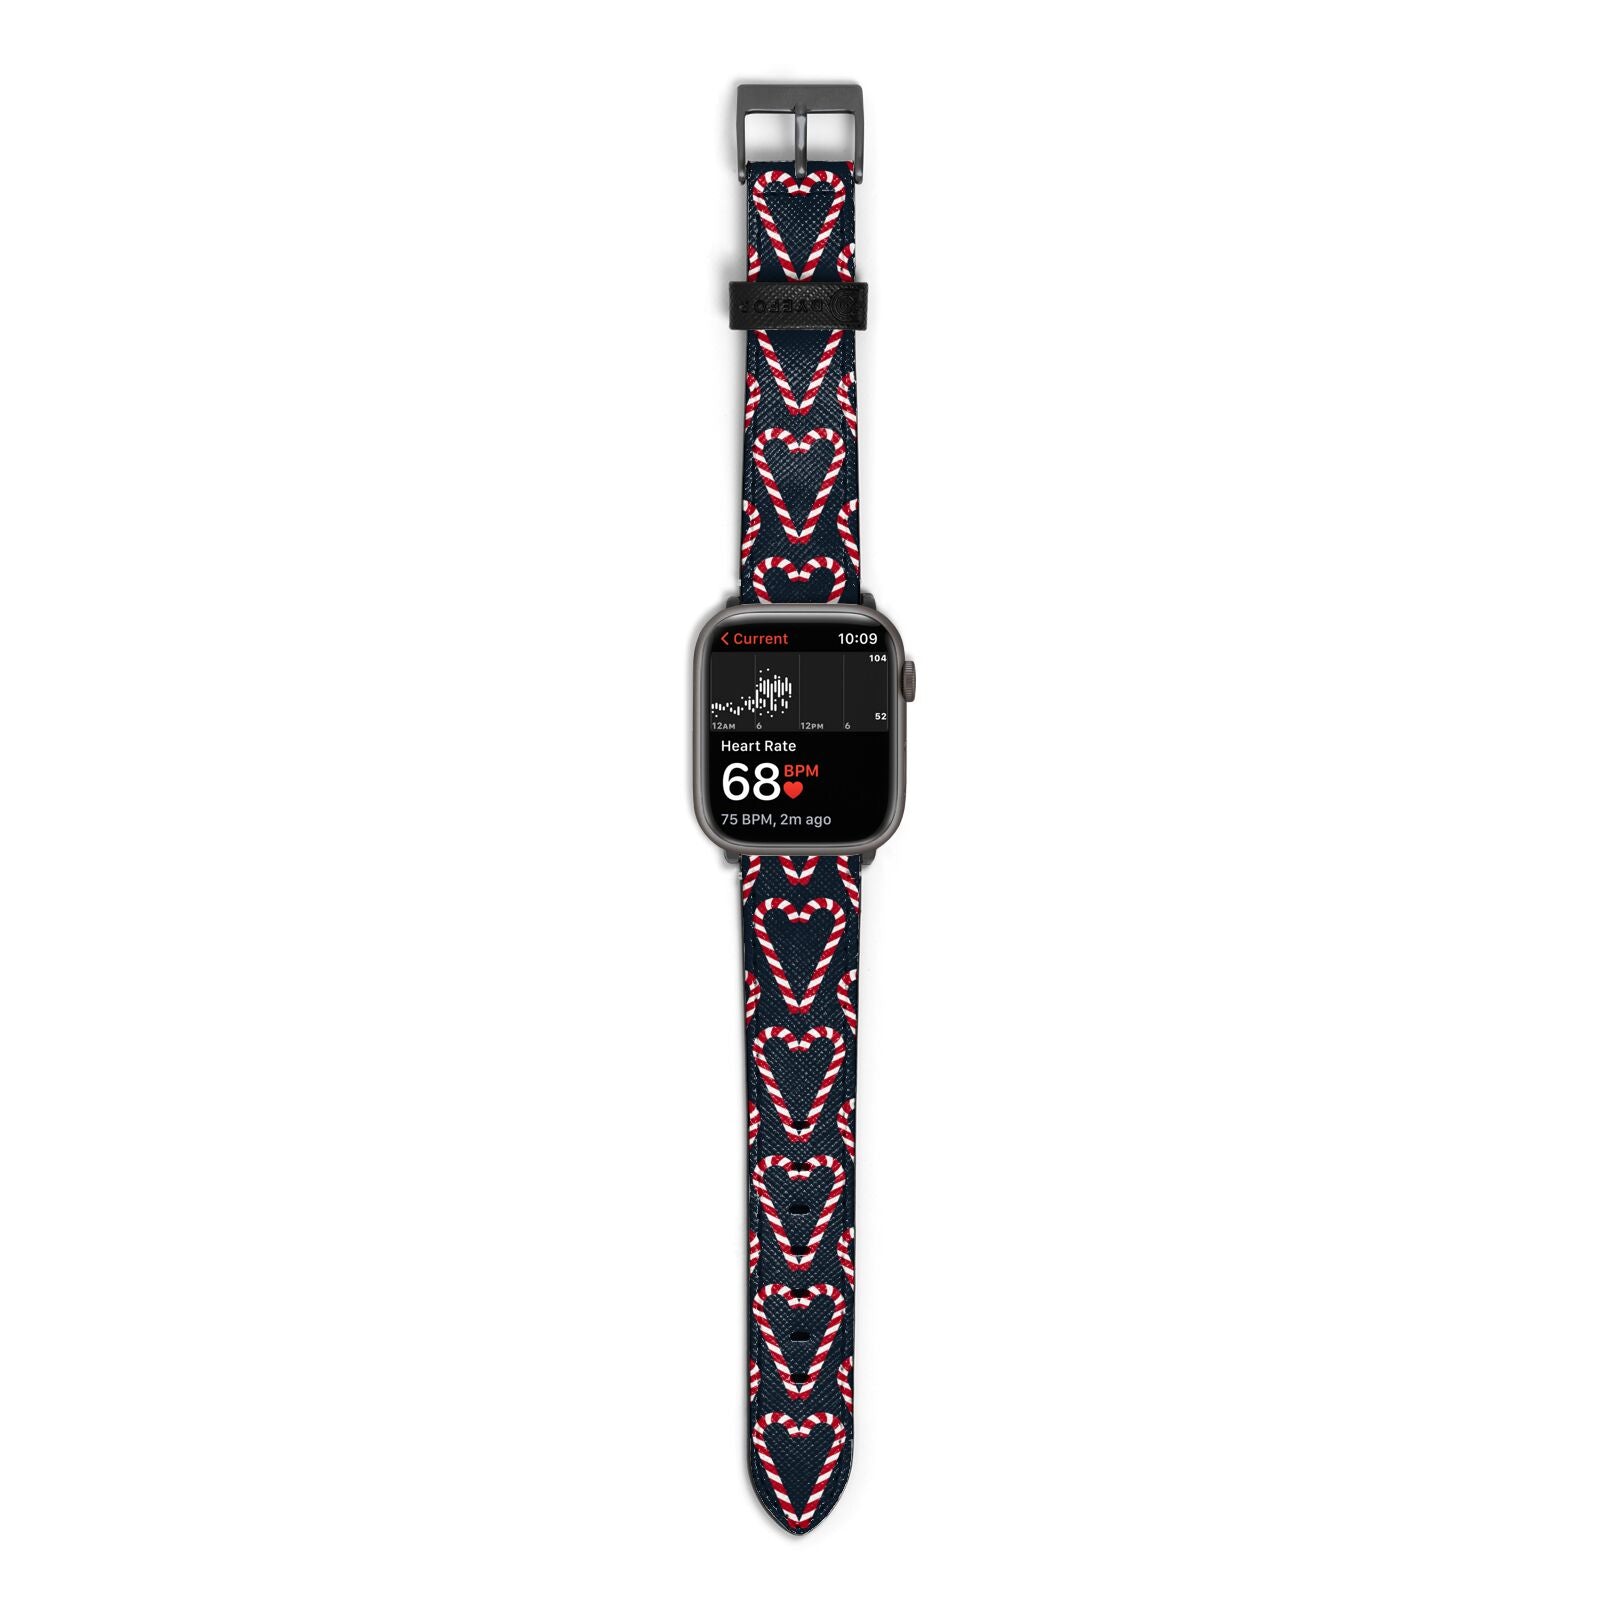 Candy Cane Pattern Apple Watch Strap Size 38mm with Space Grey Hardware